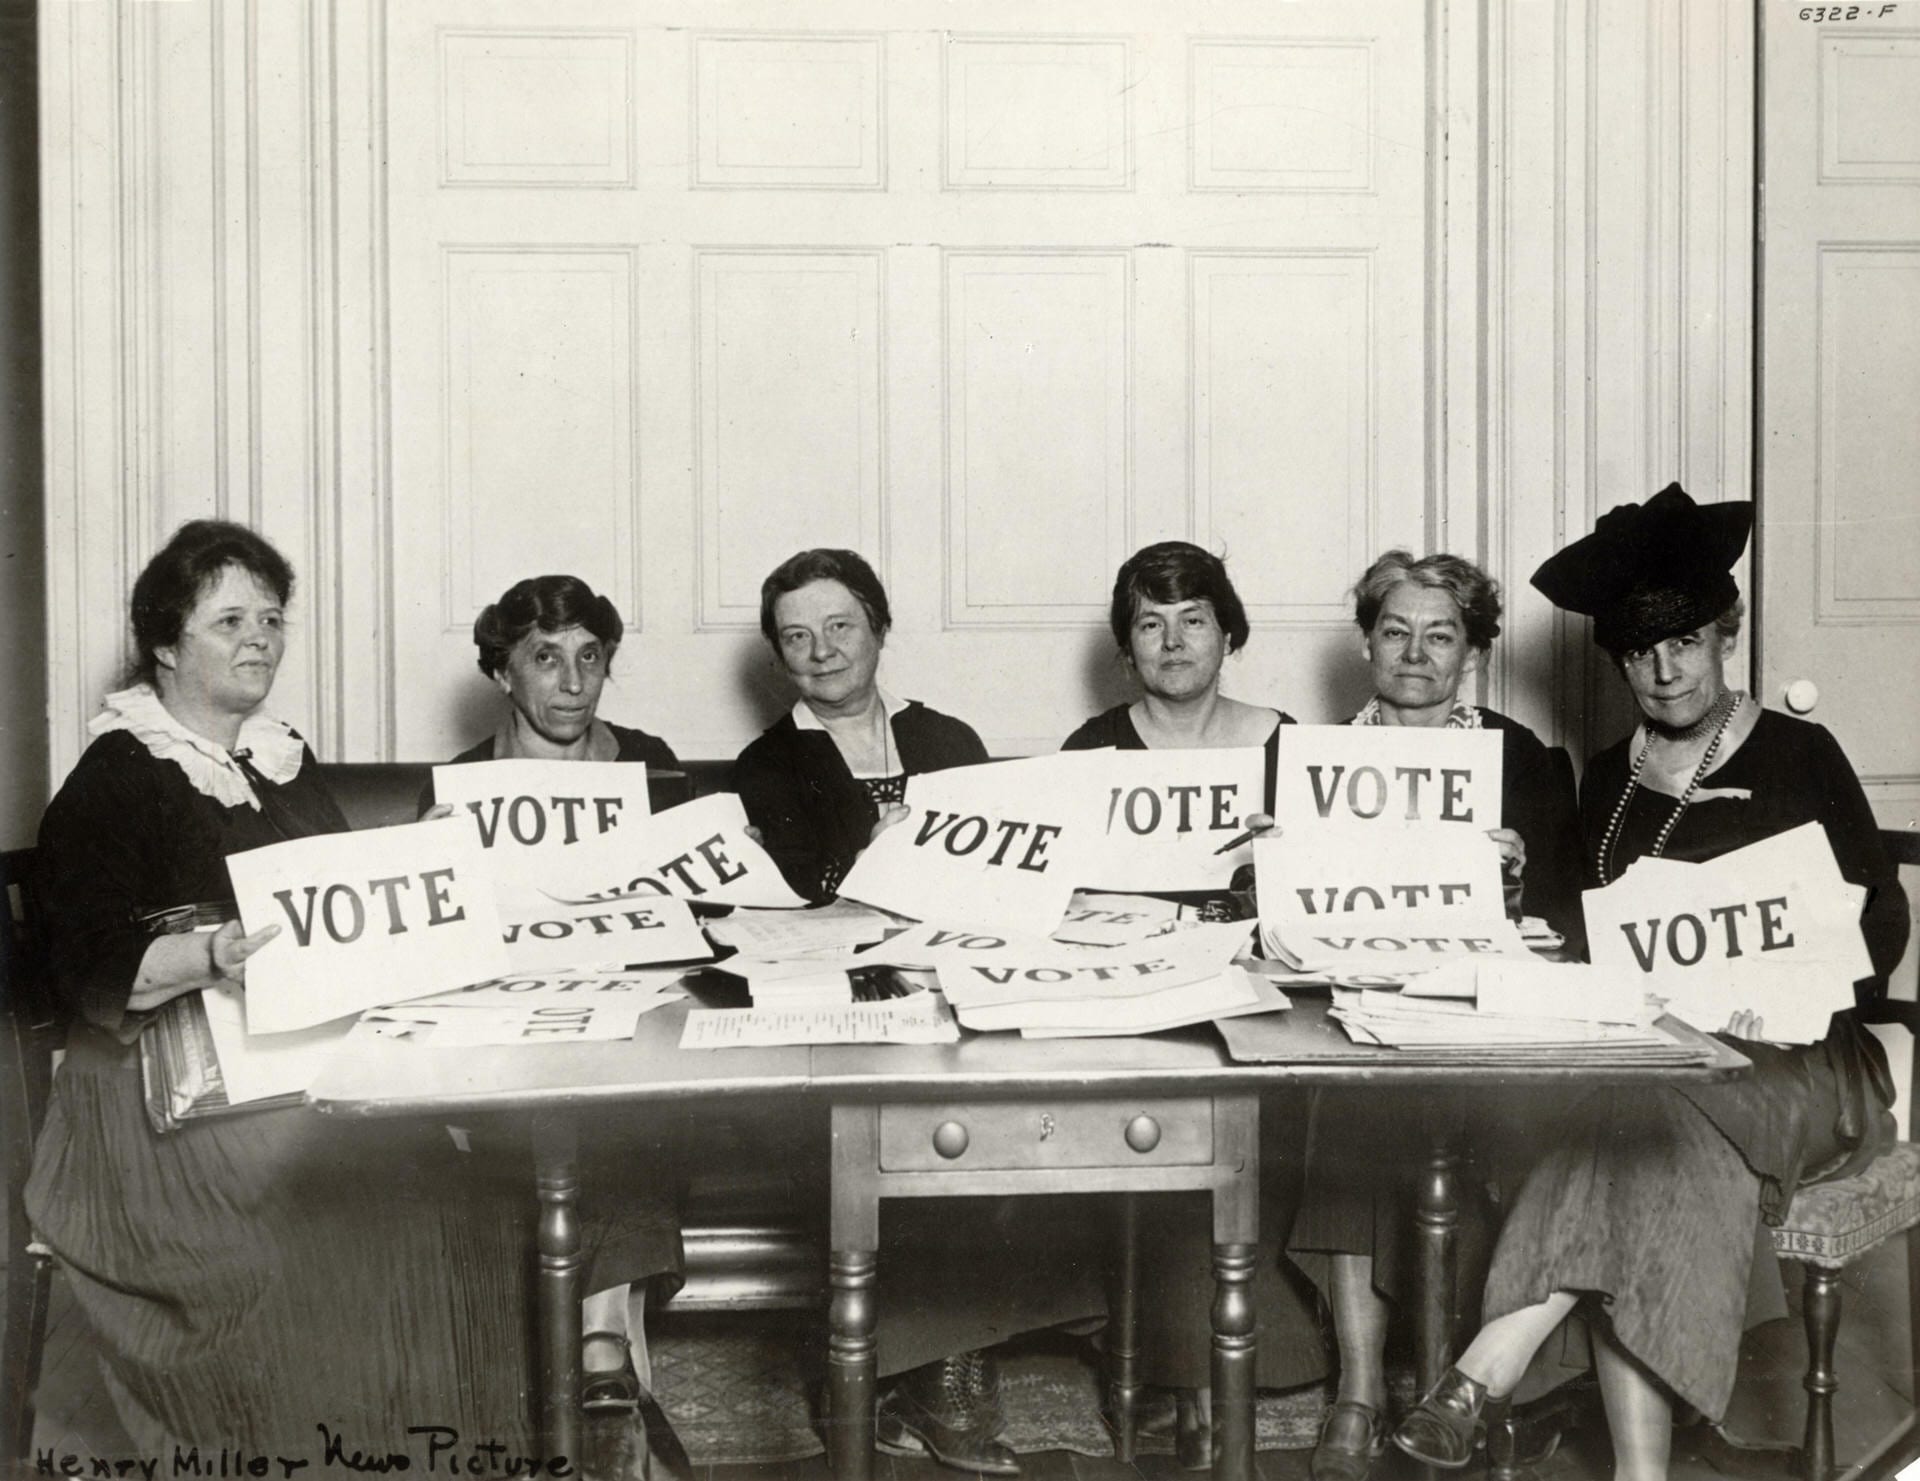 A group of women in a black and white photo hold signs that say "vote."